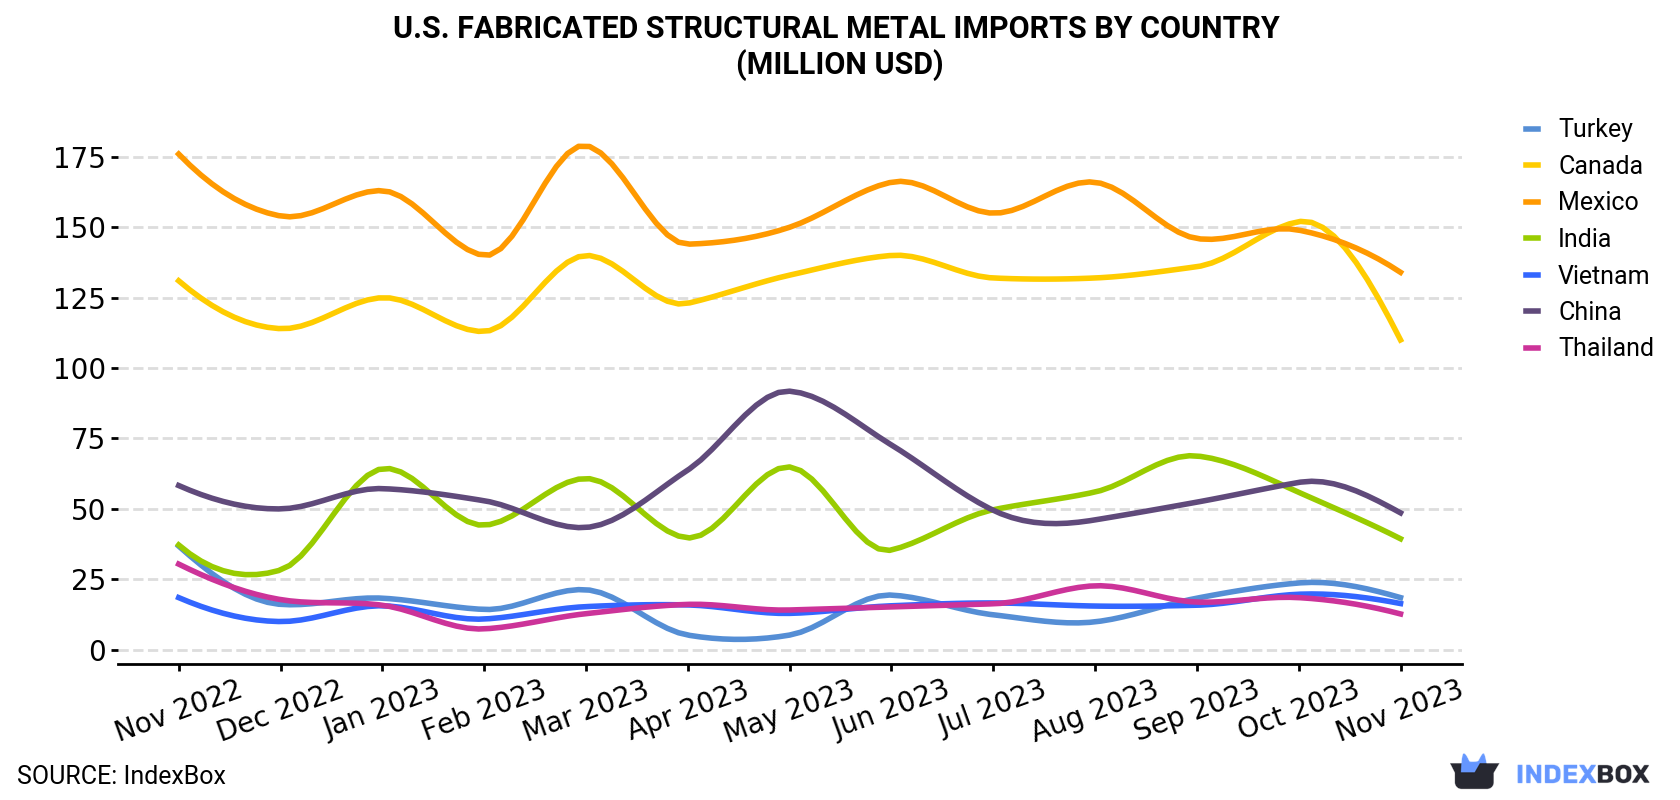 U.S. Fabricated Structural Metal Imports By Country (Million USD)